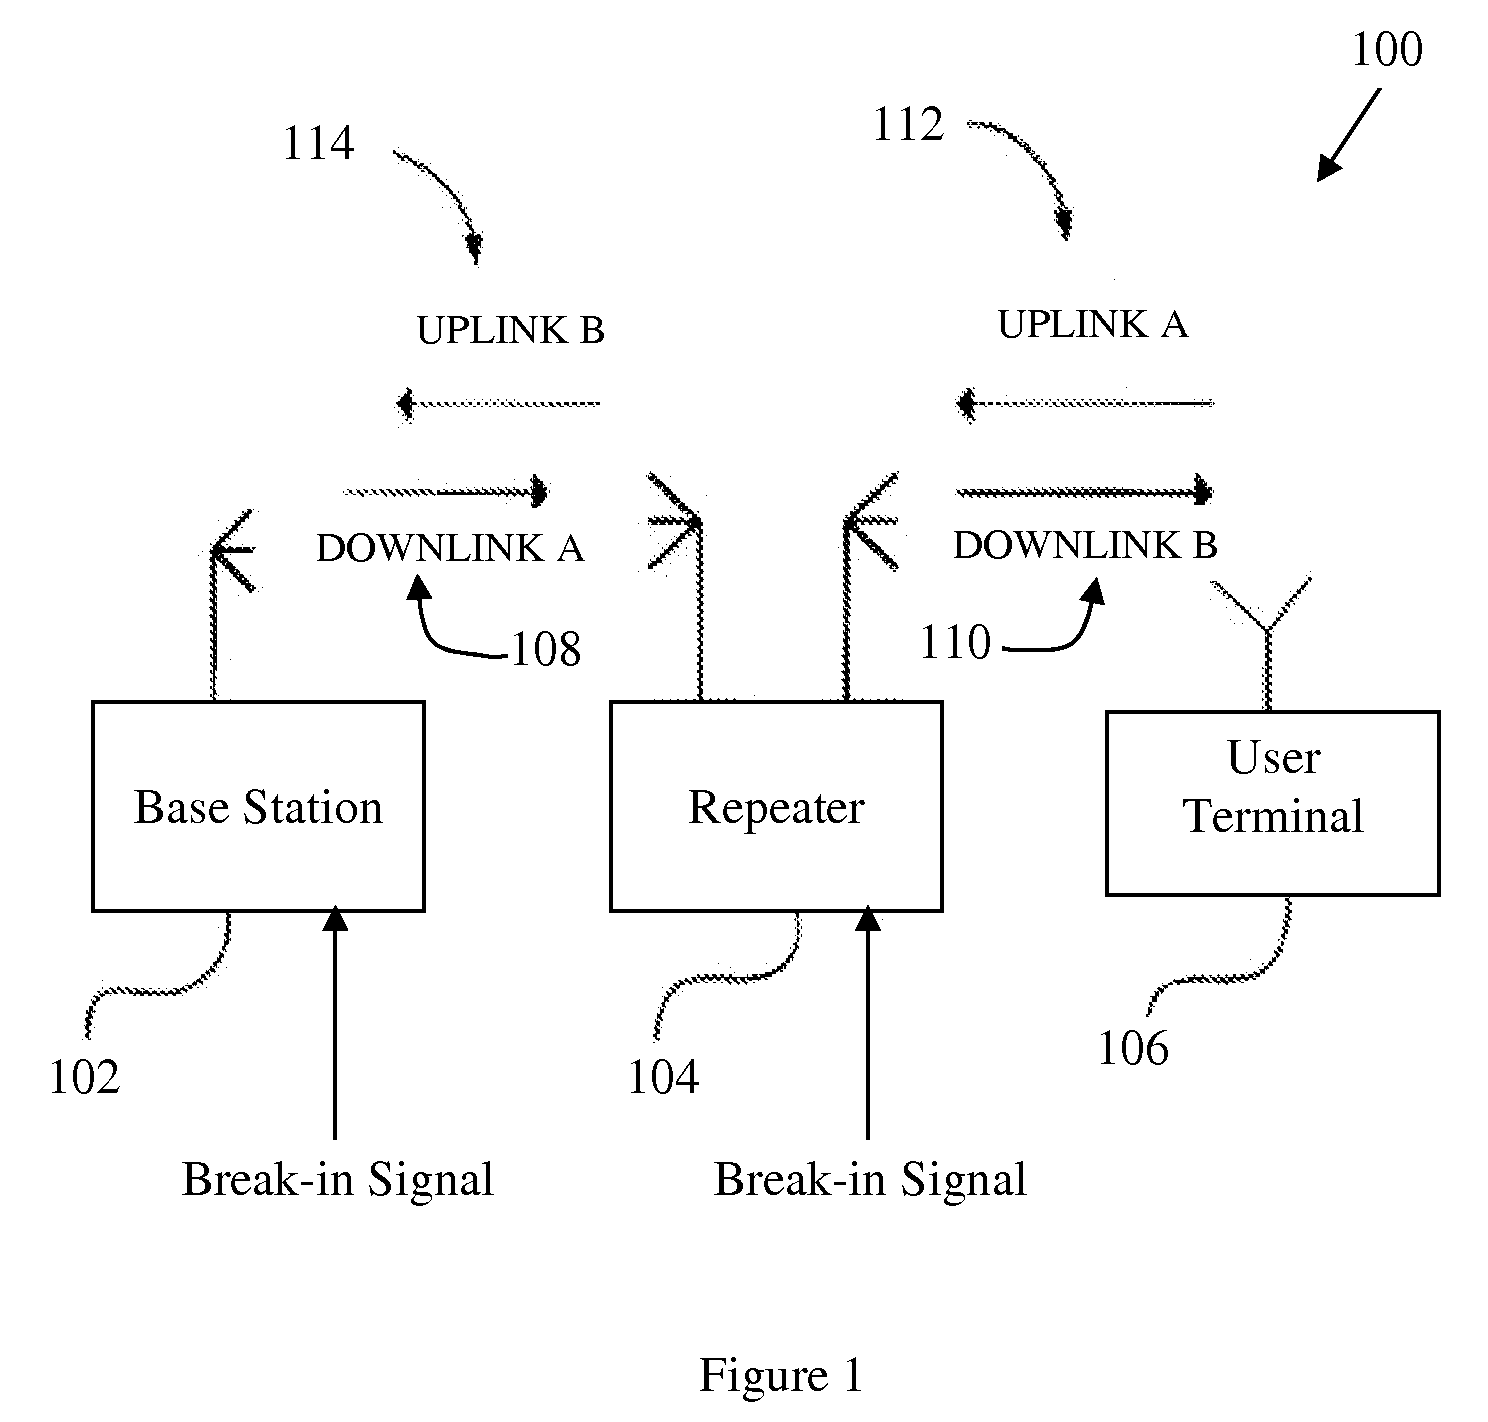 System and method for inserting break-in signals in communication systems